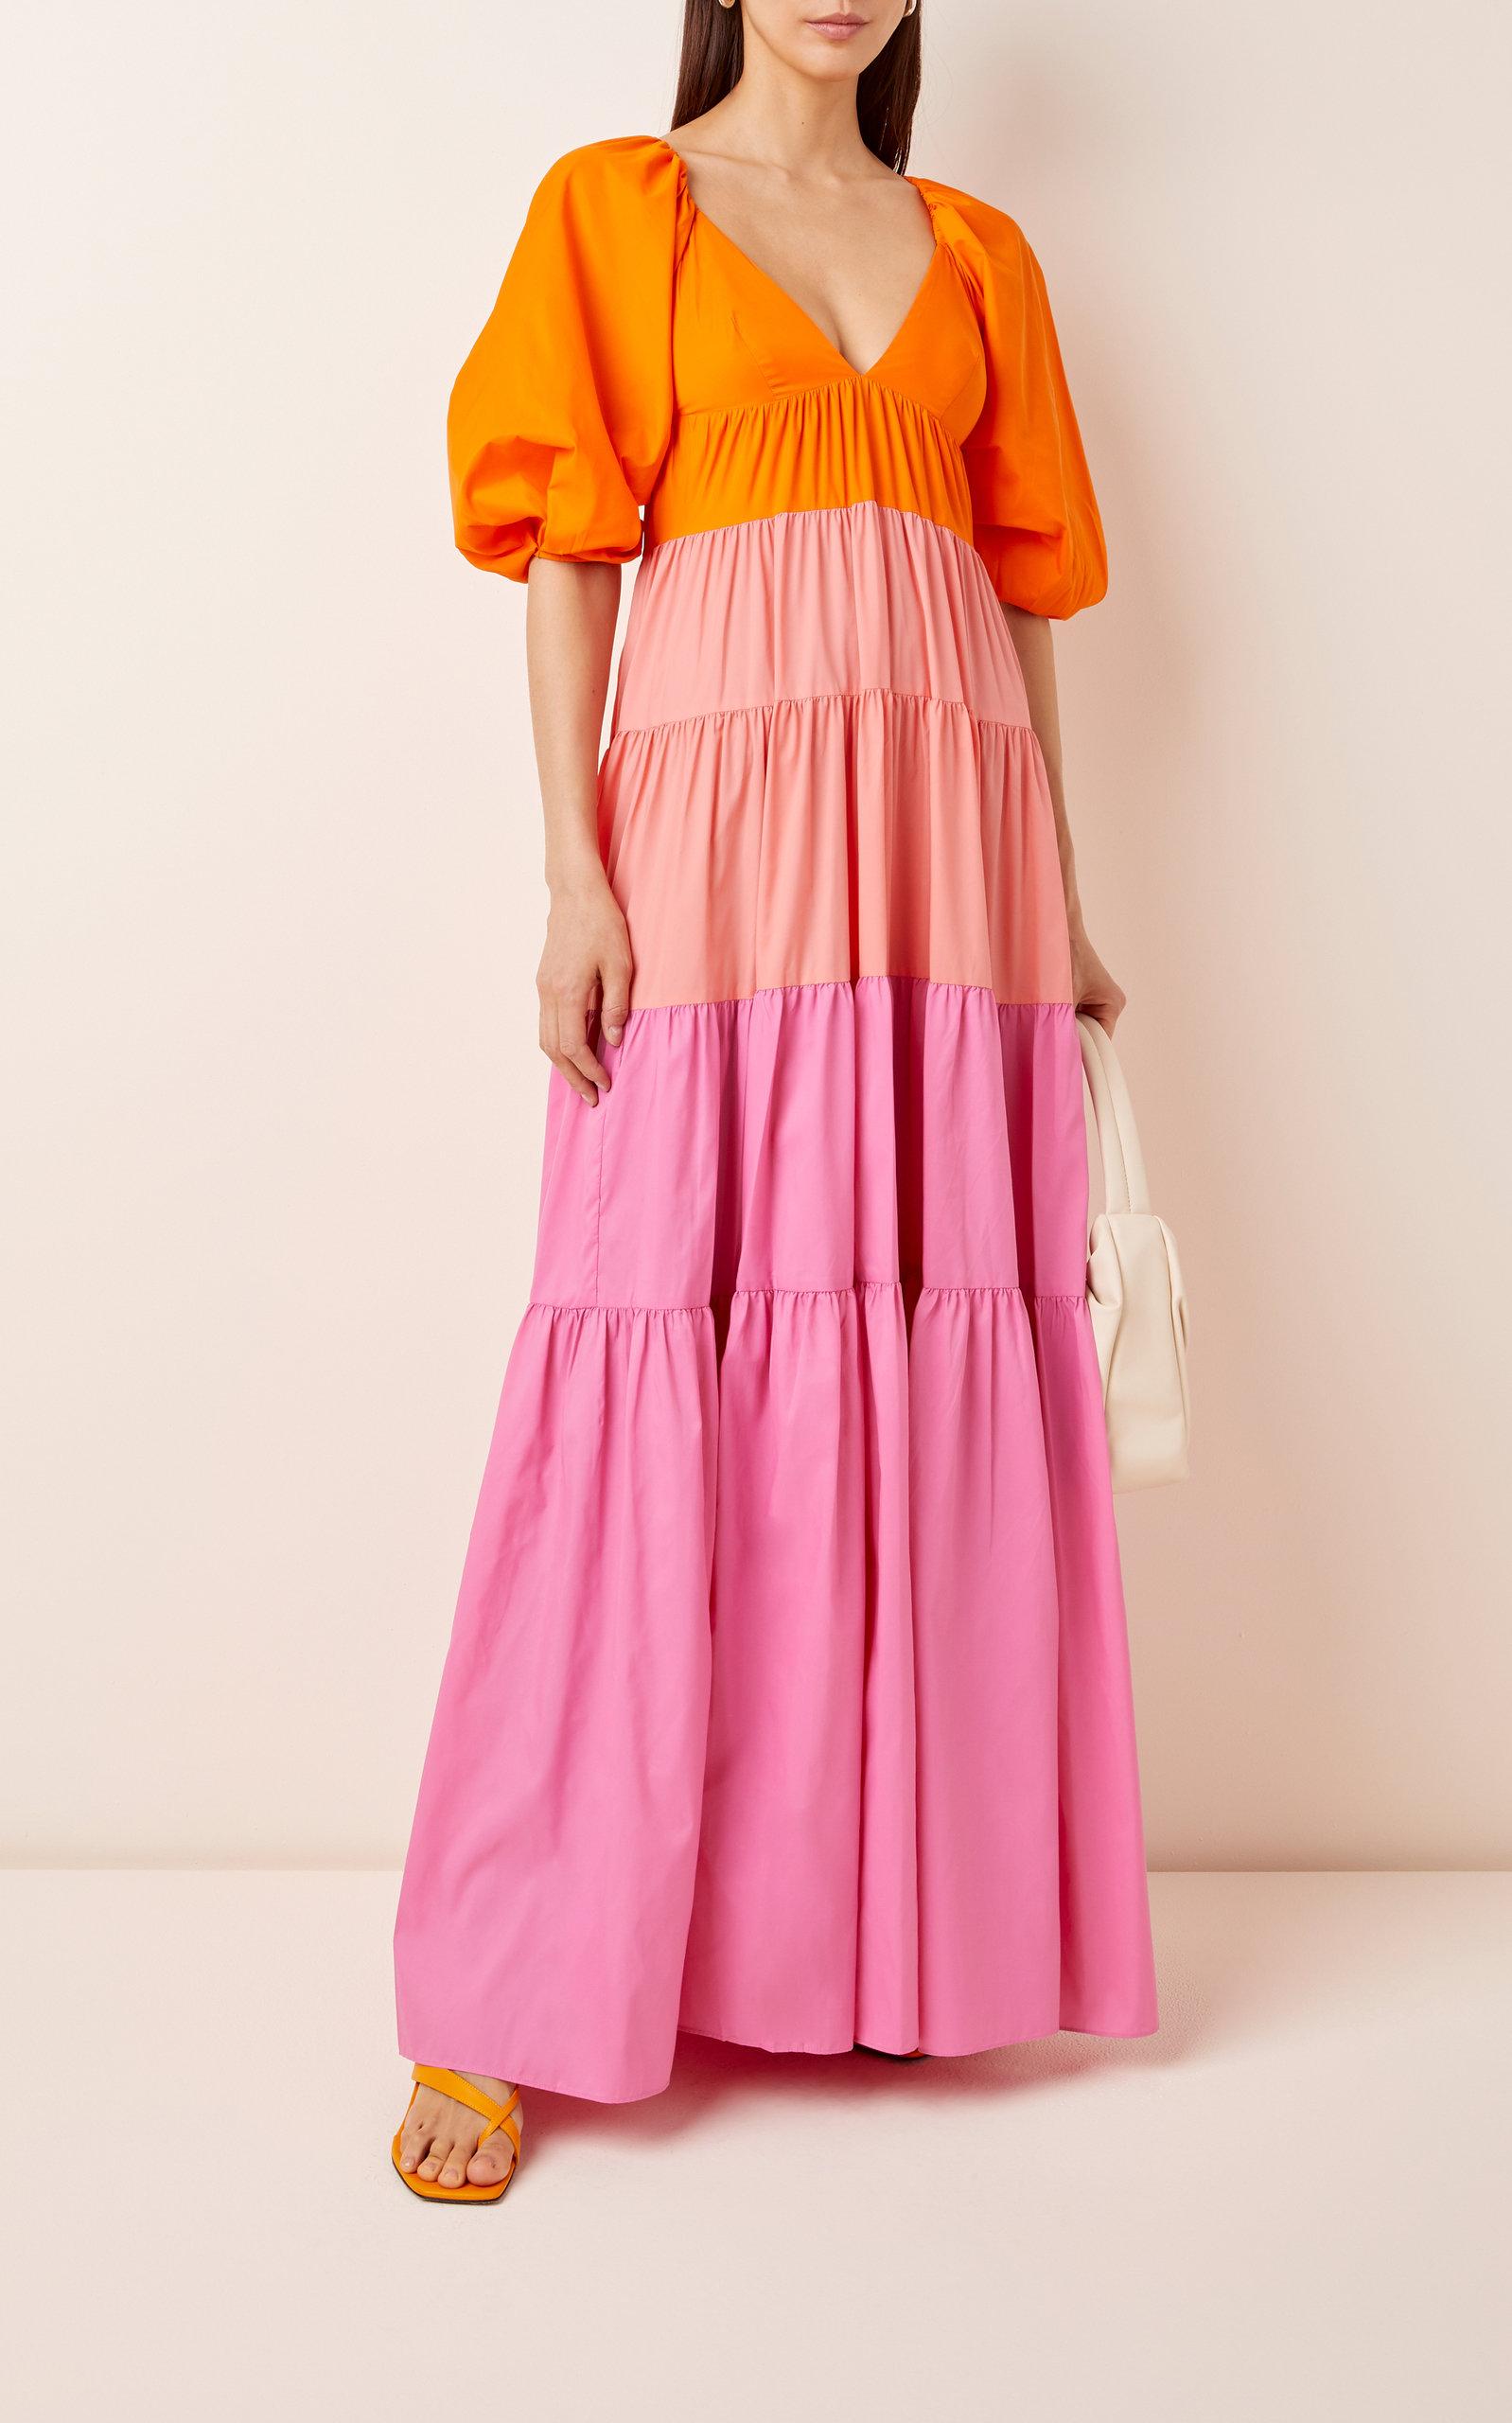 STAUD Synthetic Meadow Tiered Crepe De Chine Maxi Dress in Pink/Orange ...